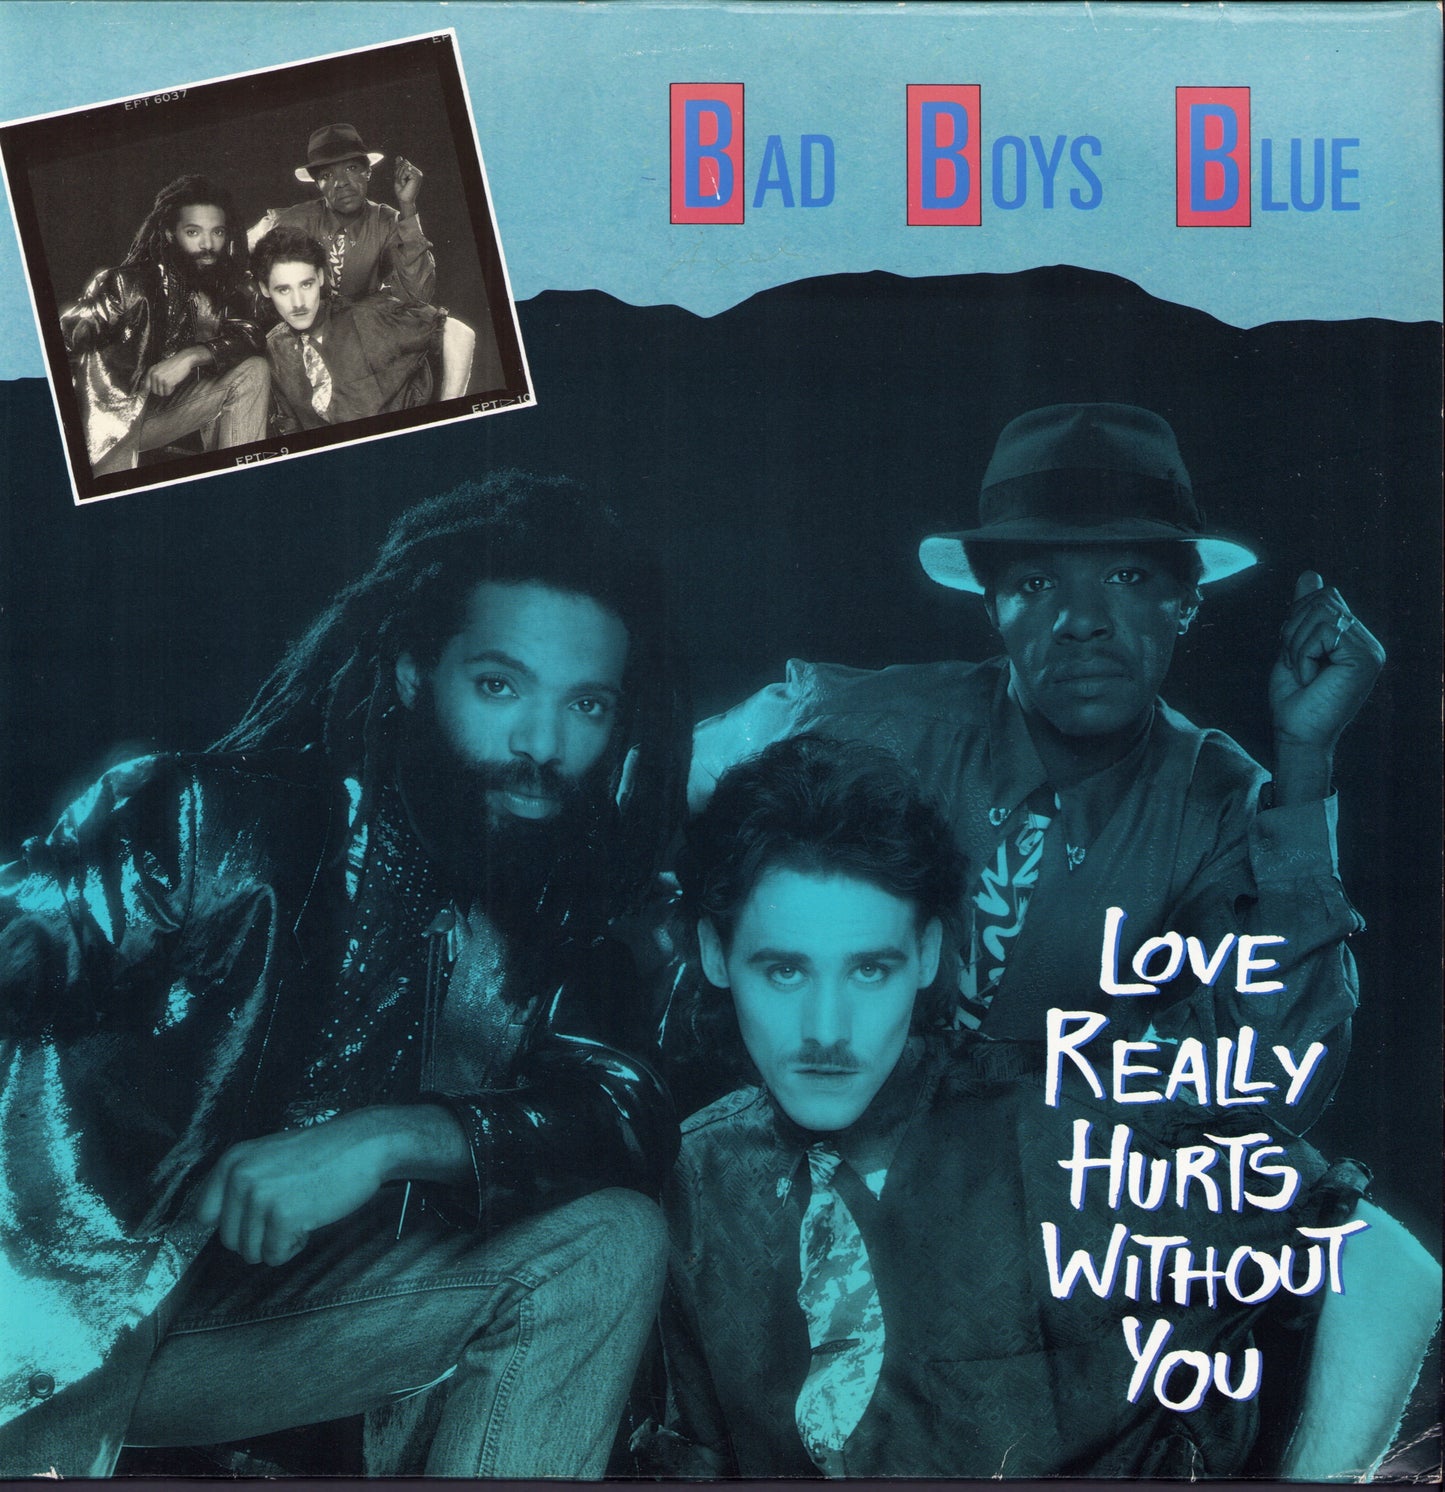 Bad Boys Blue - Love Really Hurts Without You (Vinyl 12")